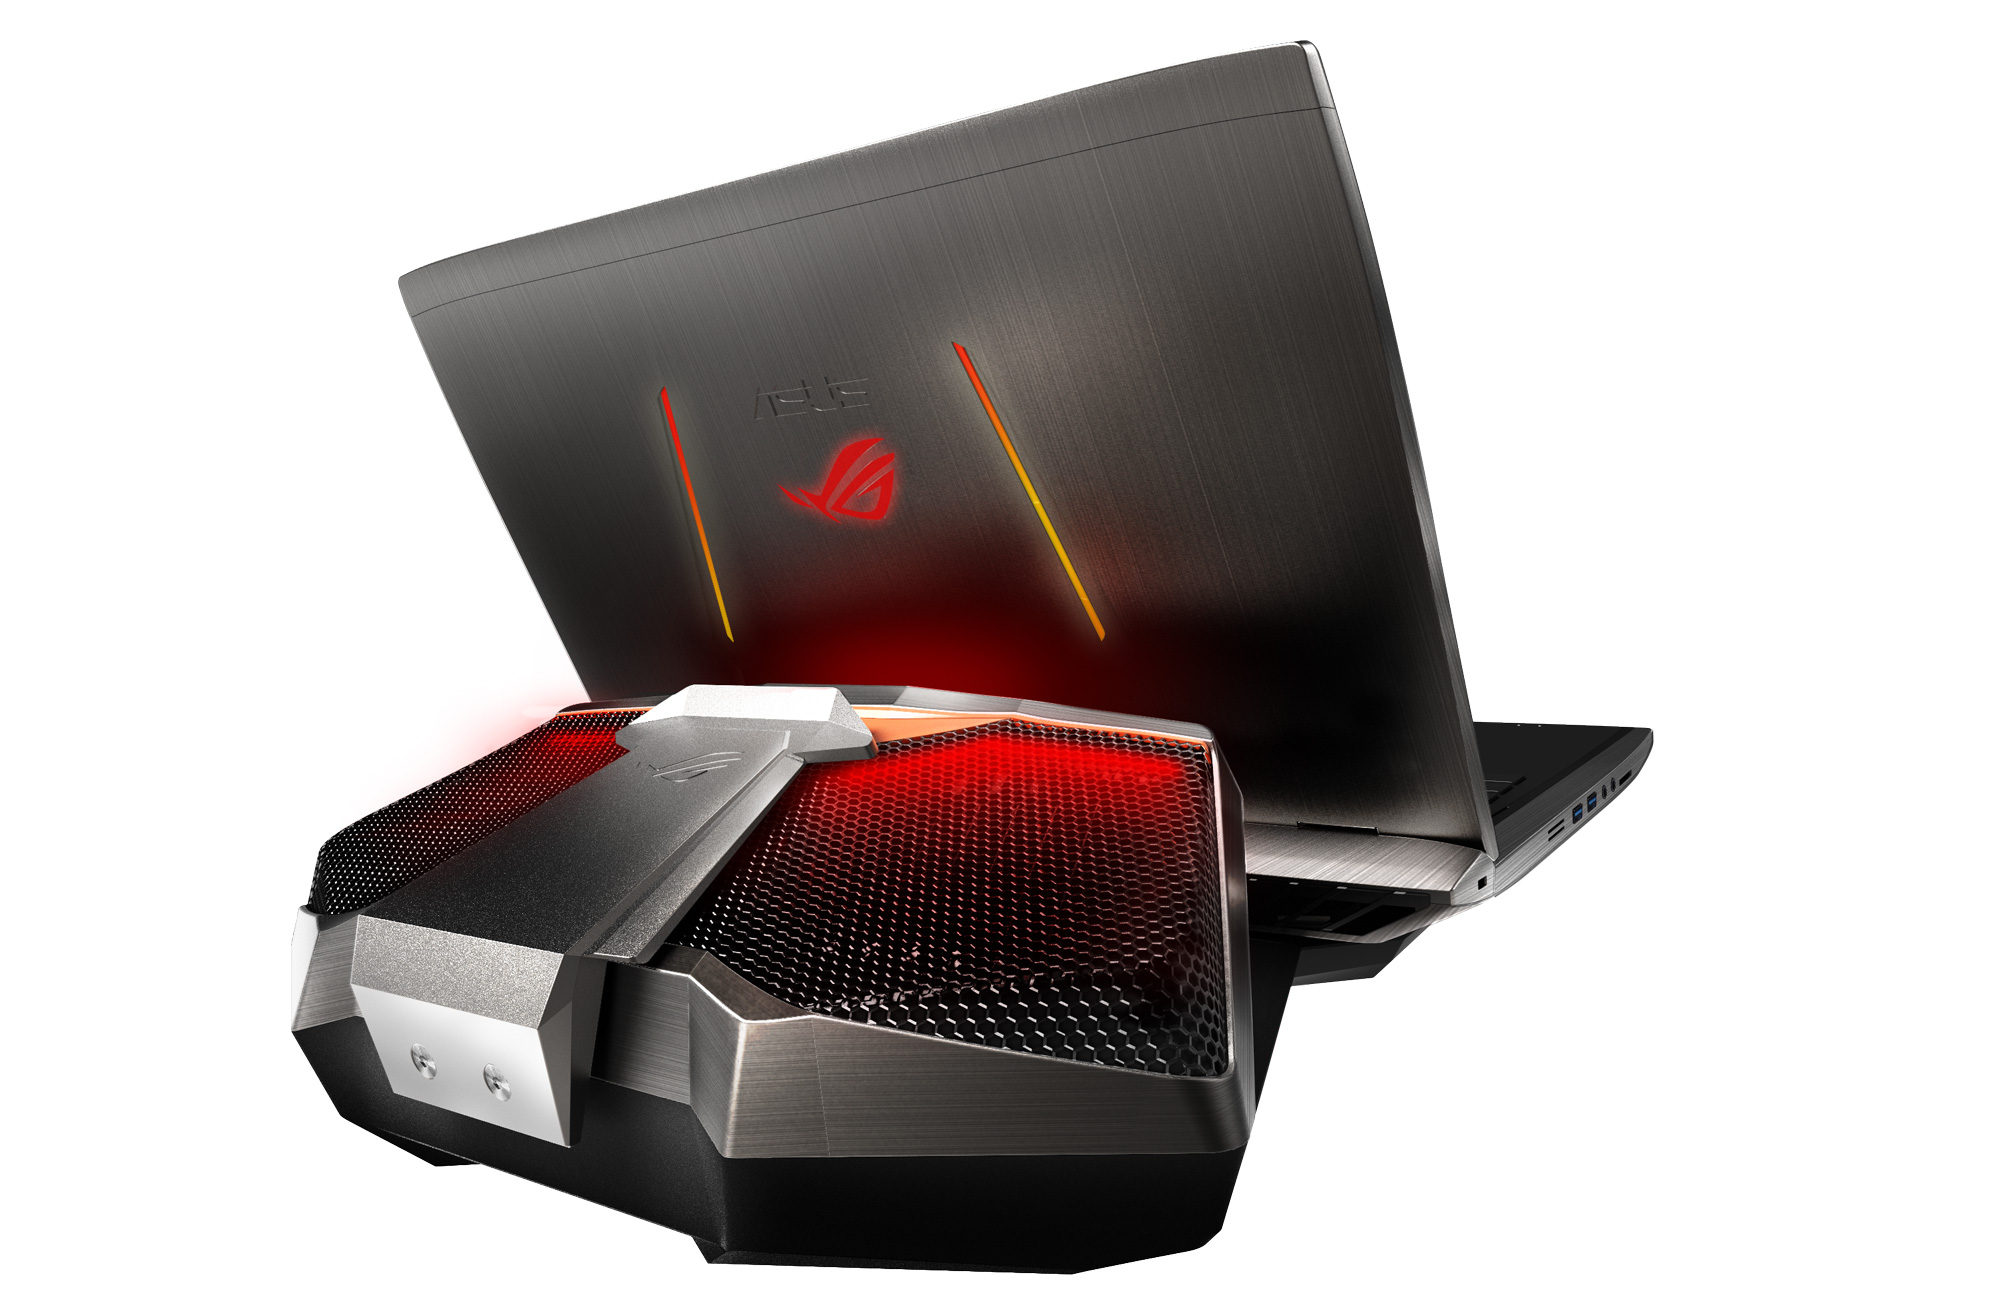 ASUS ROG unveils new lineup at IFA 2015 28